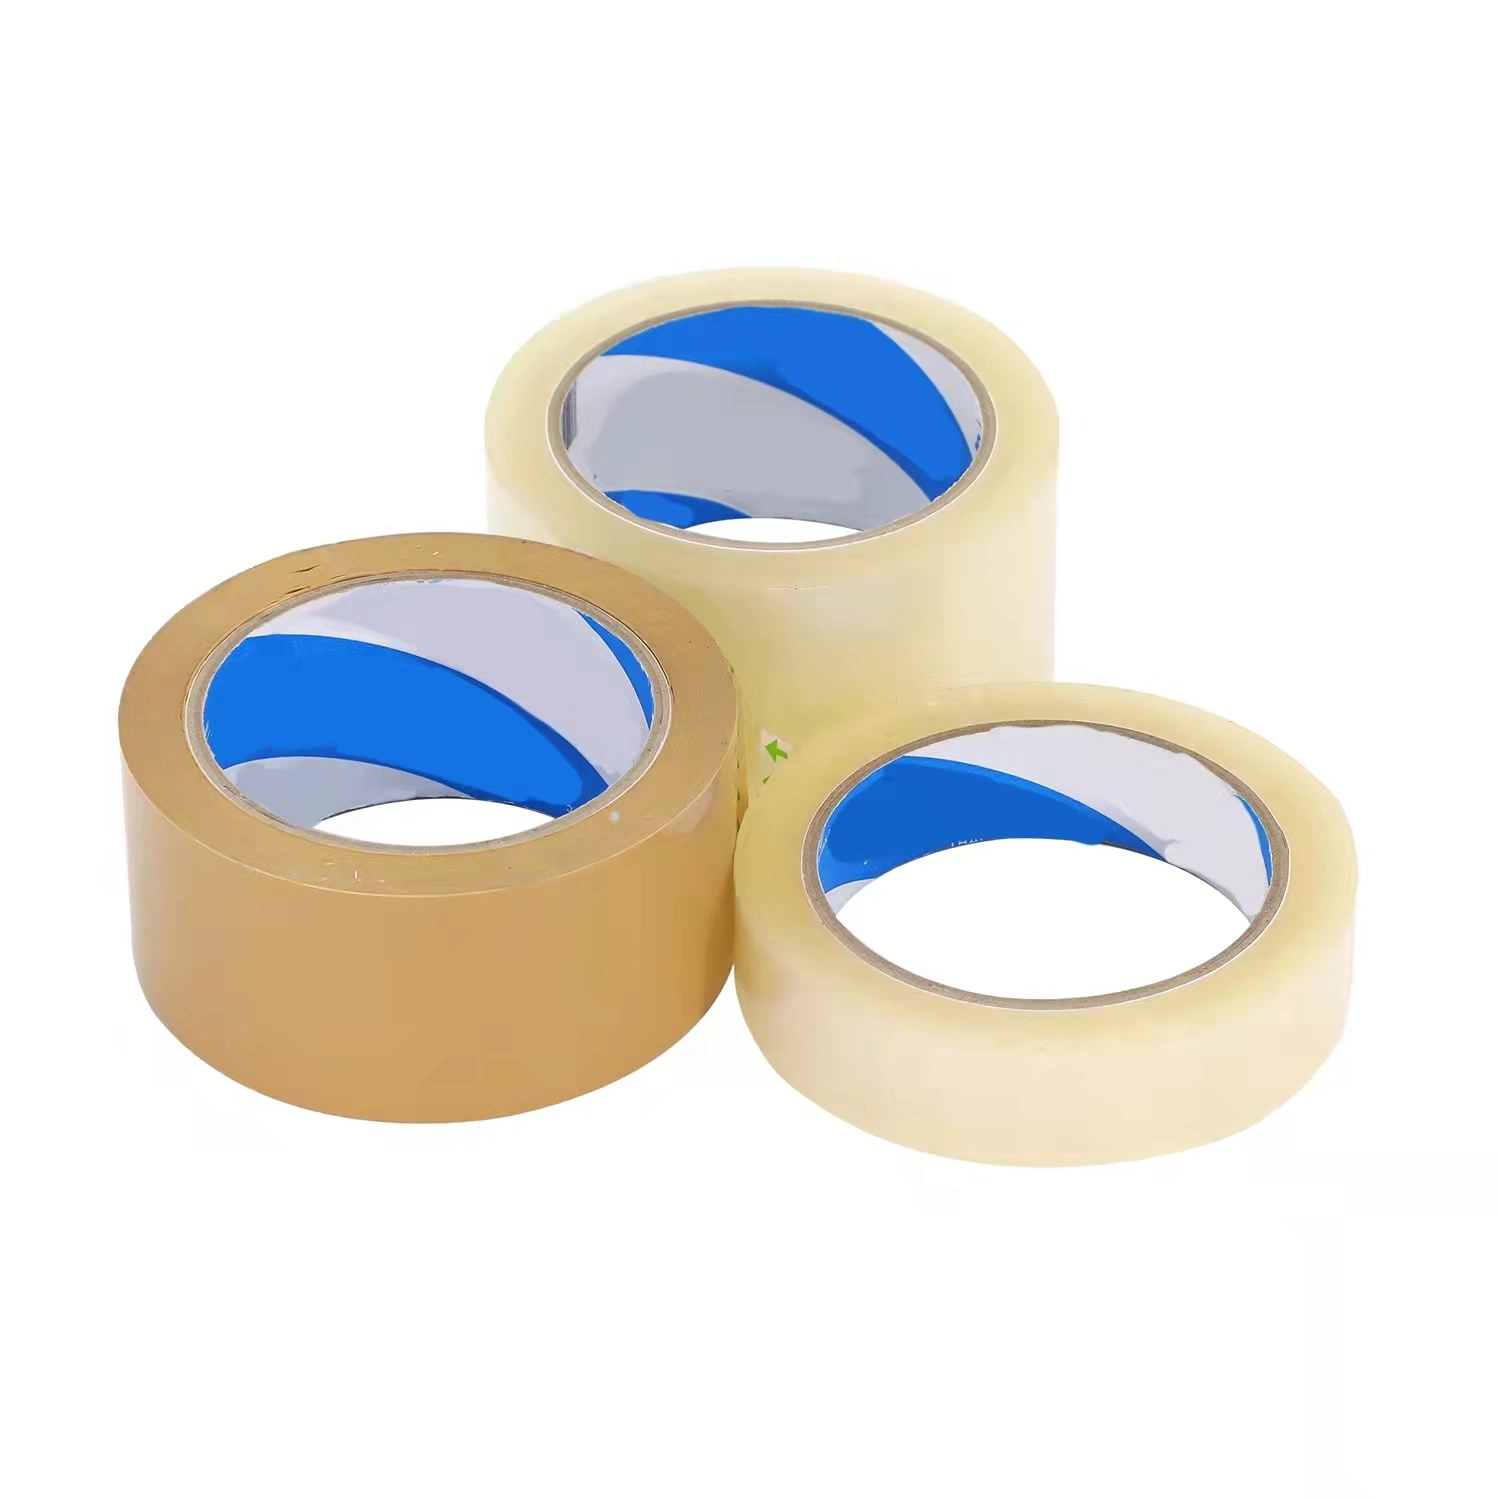 Flame Retardant PVC Electrical Insulation Adhesive Tape Carton Packing Tape BOPP OPP Tape Double Faced Adhesive Tape